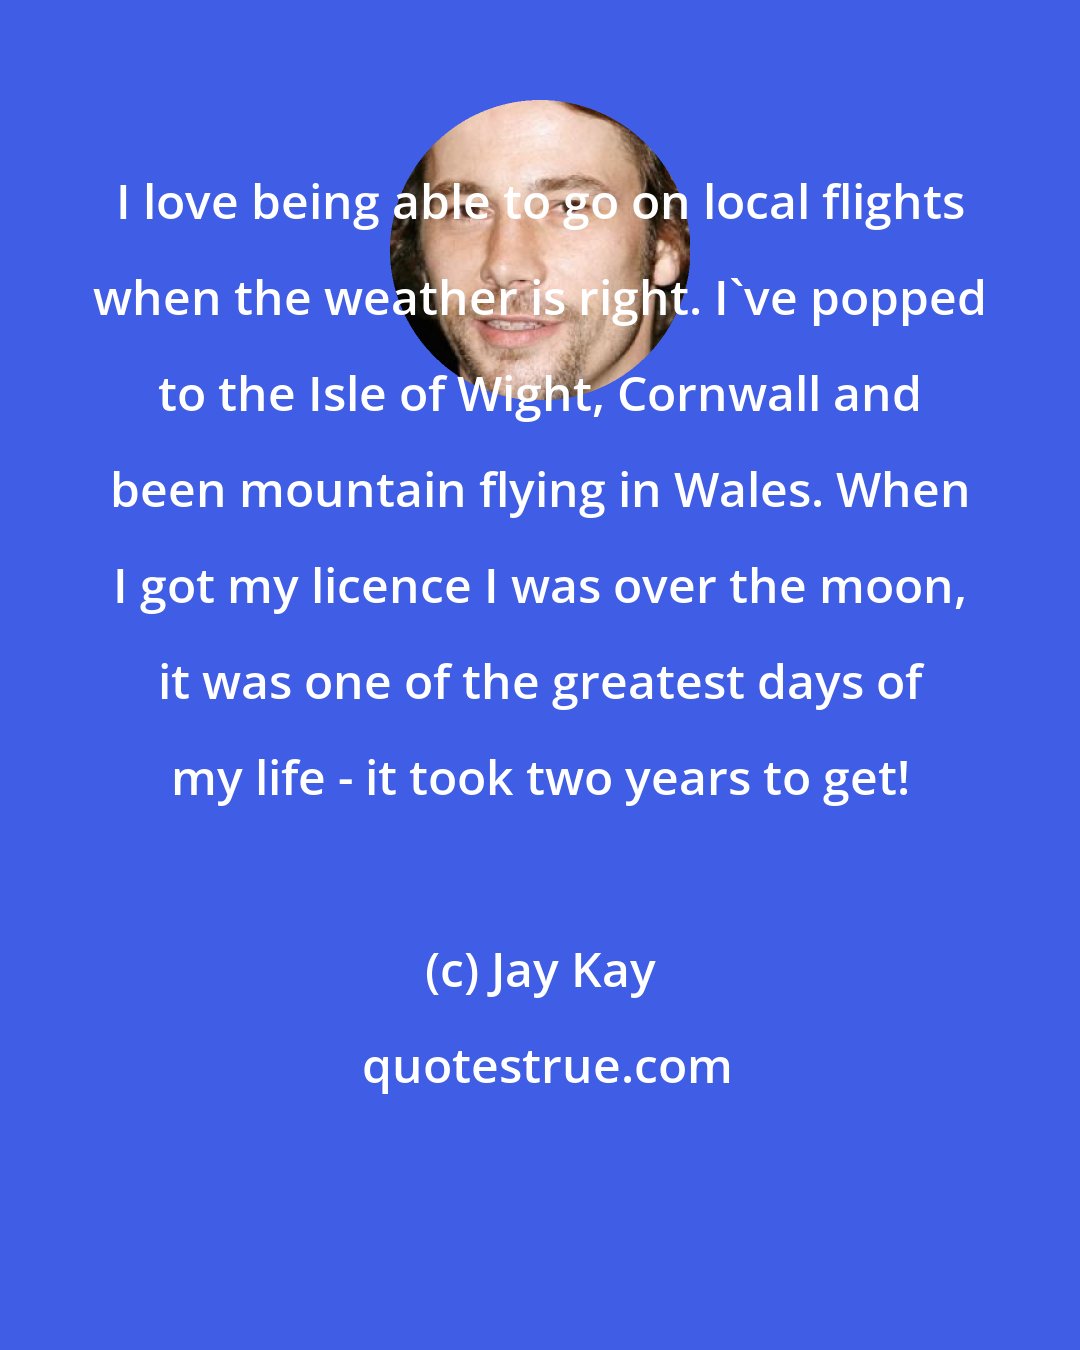 Jay Kay: I love being able to go on local flights when the weather is right. I've popped to the Isle of Wight, Cornwall and been mountain flying in Wales. When I got my licence I was over the moon, it was one of the greatest days of my life - it took two years to get!